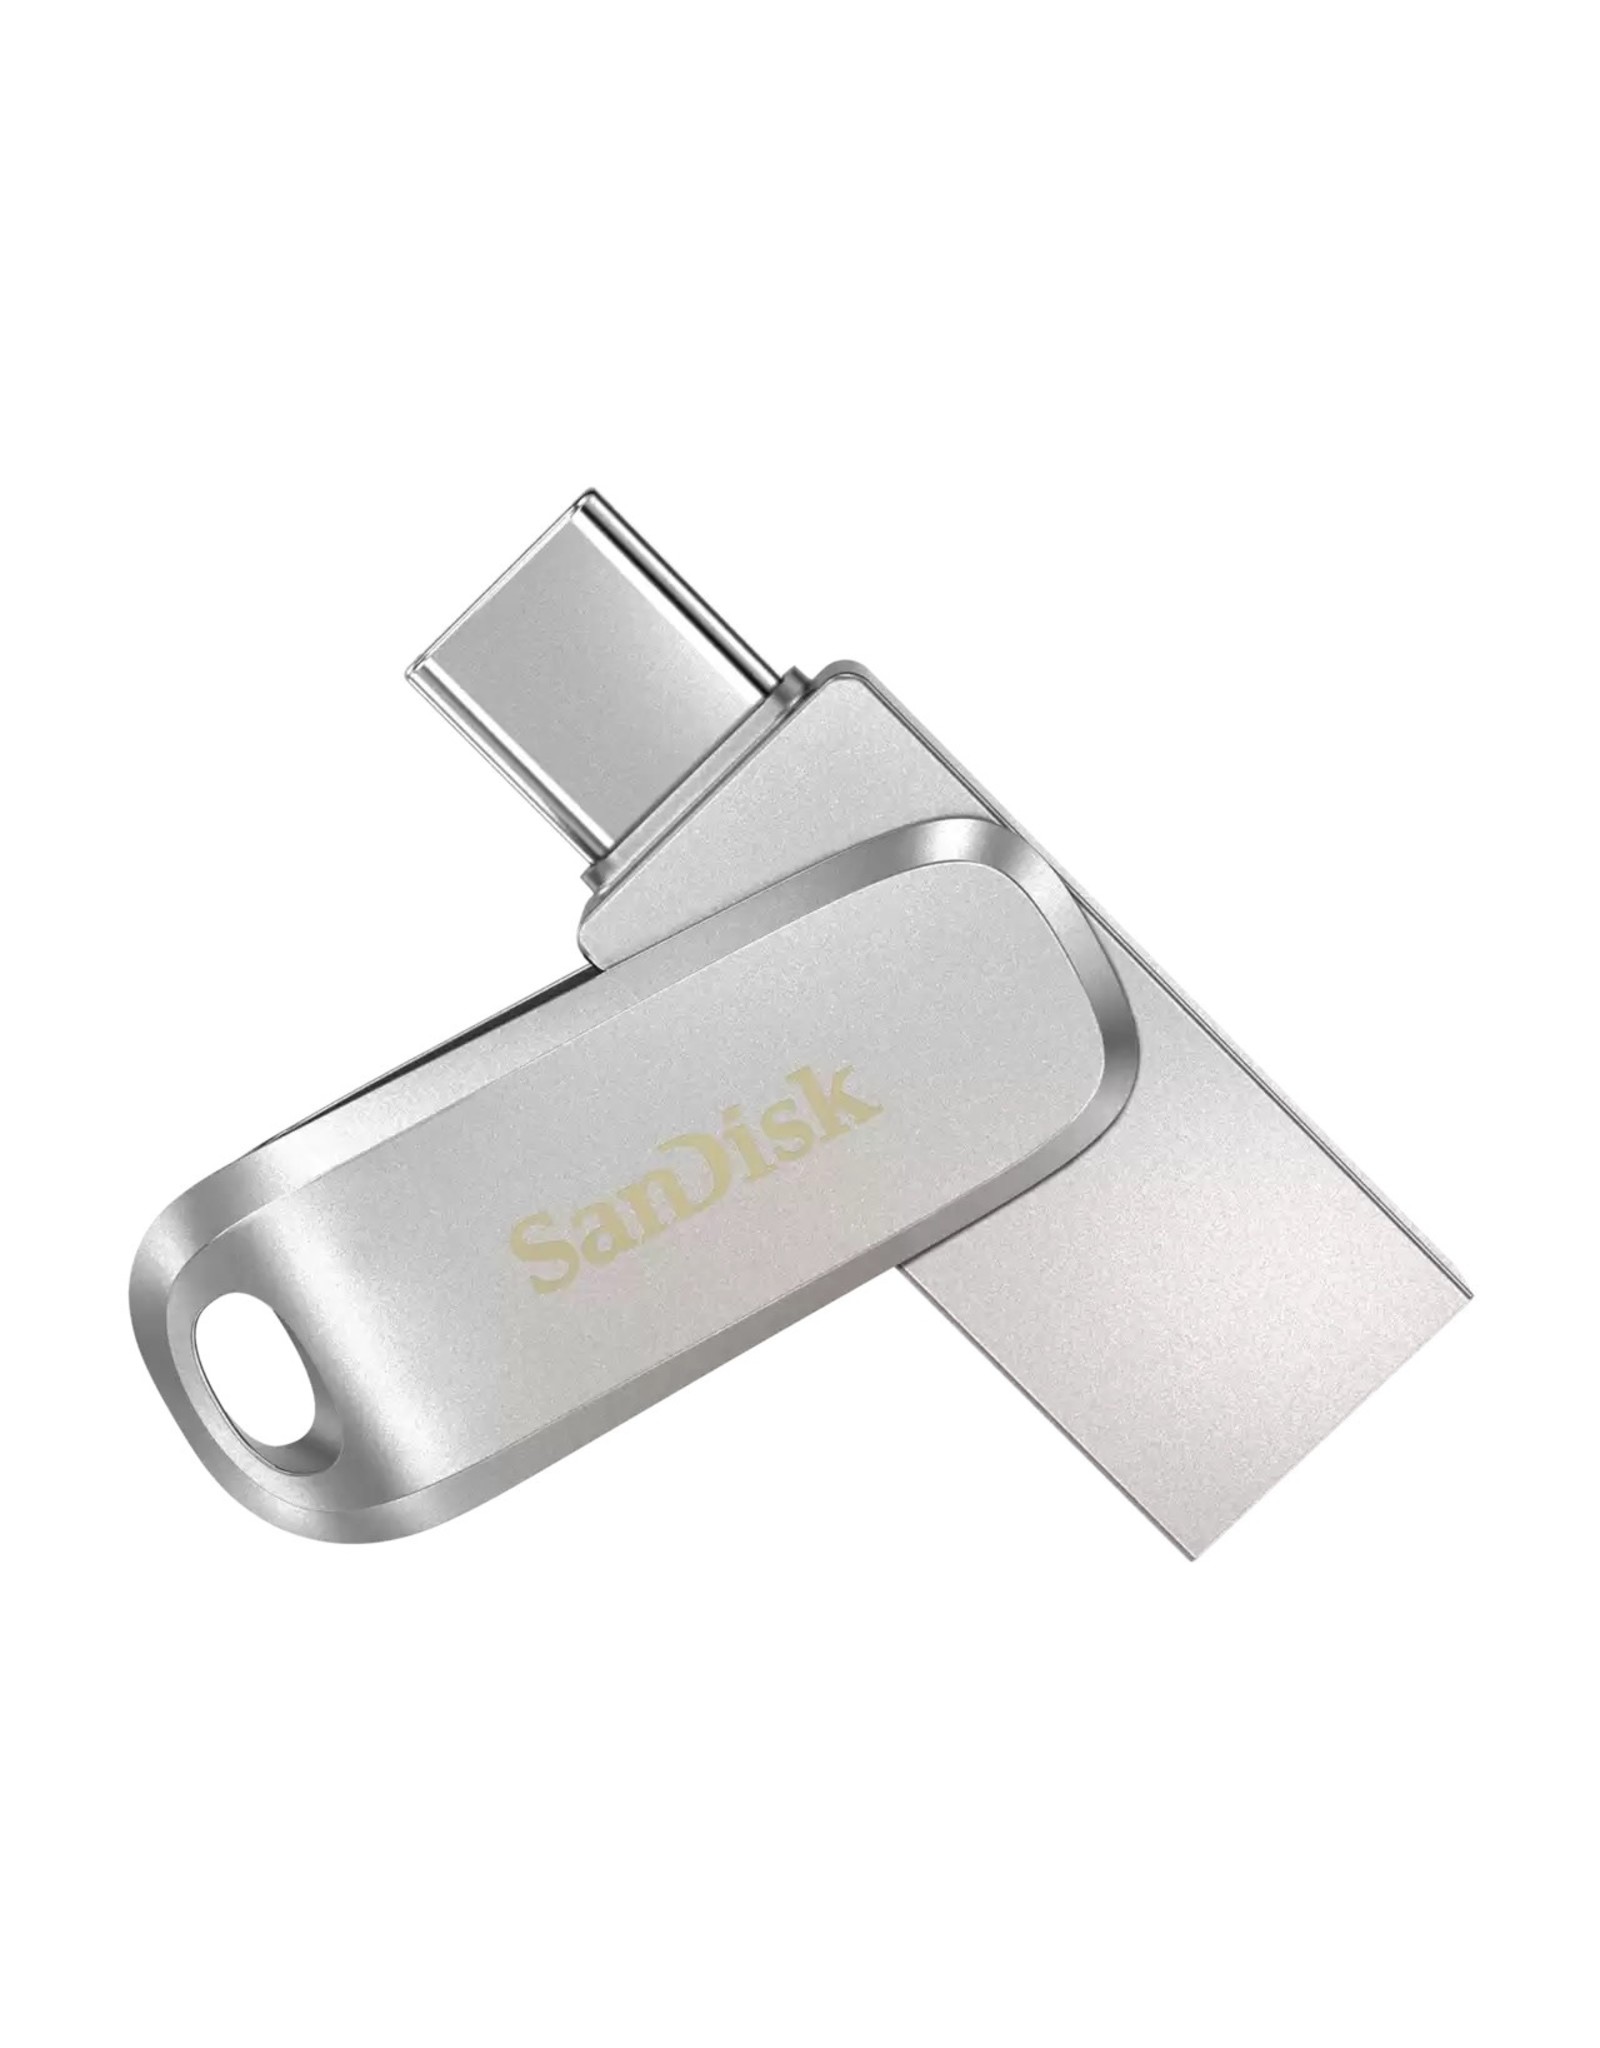 Sandisk SanDisk Ultra® 1TB Dual Drive Luxe USB-C and USB-A